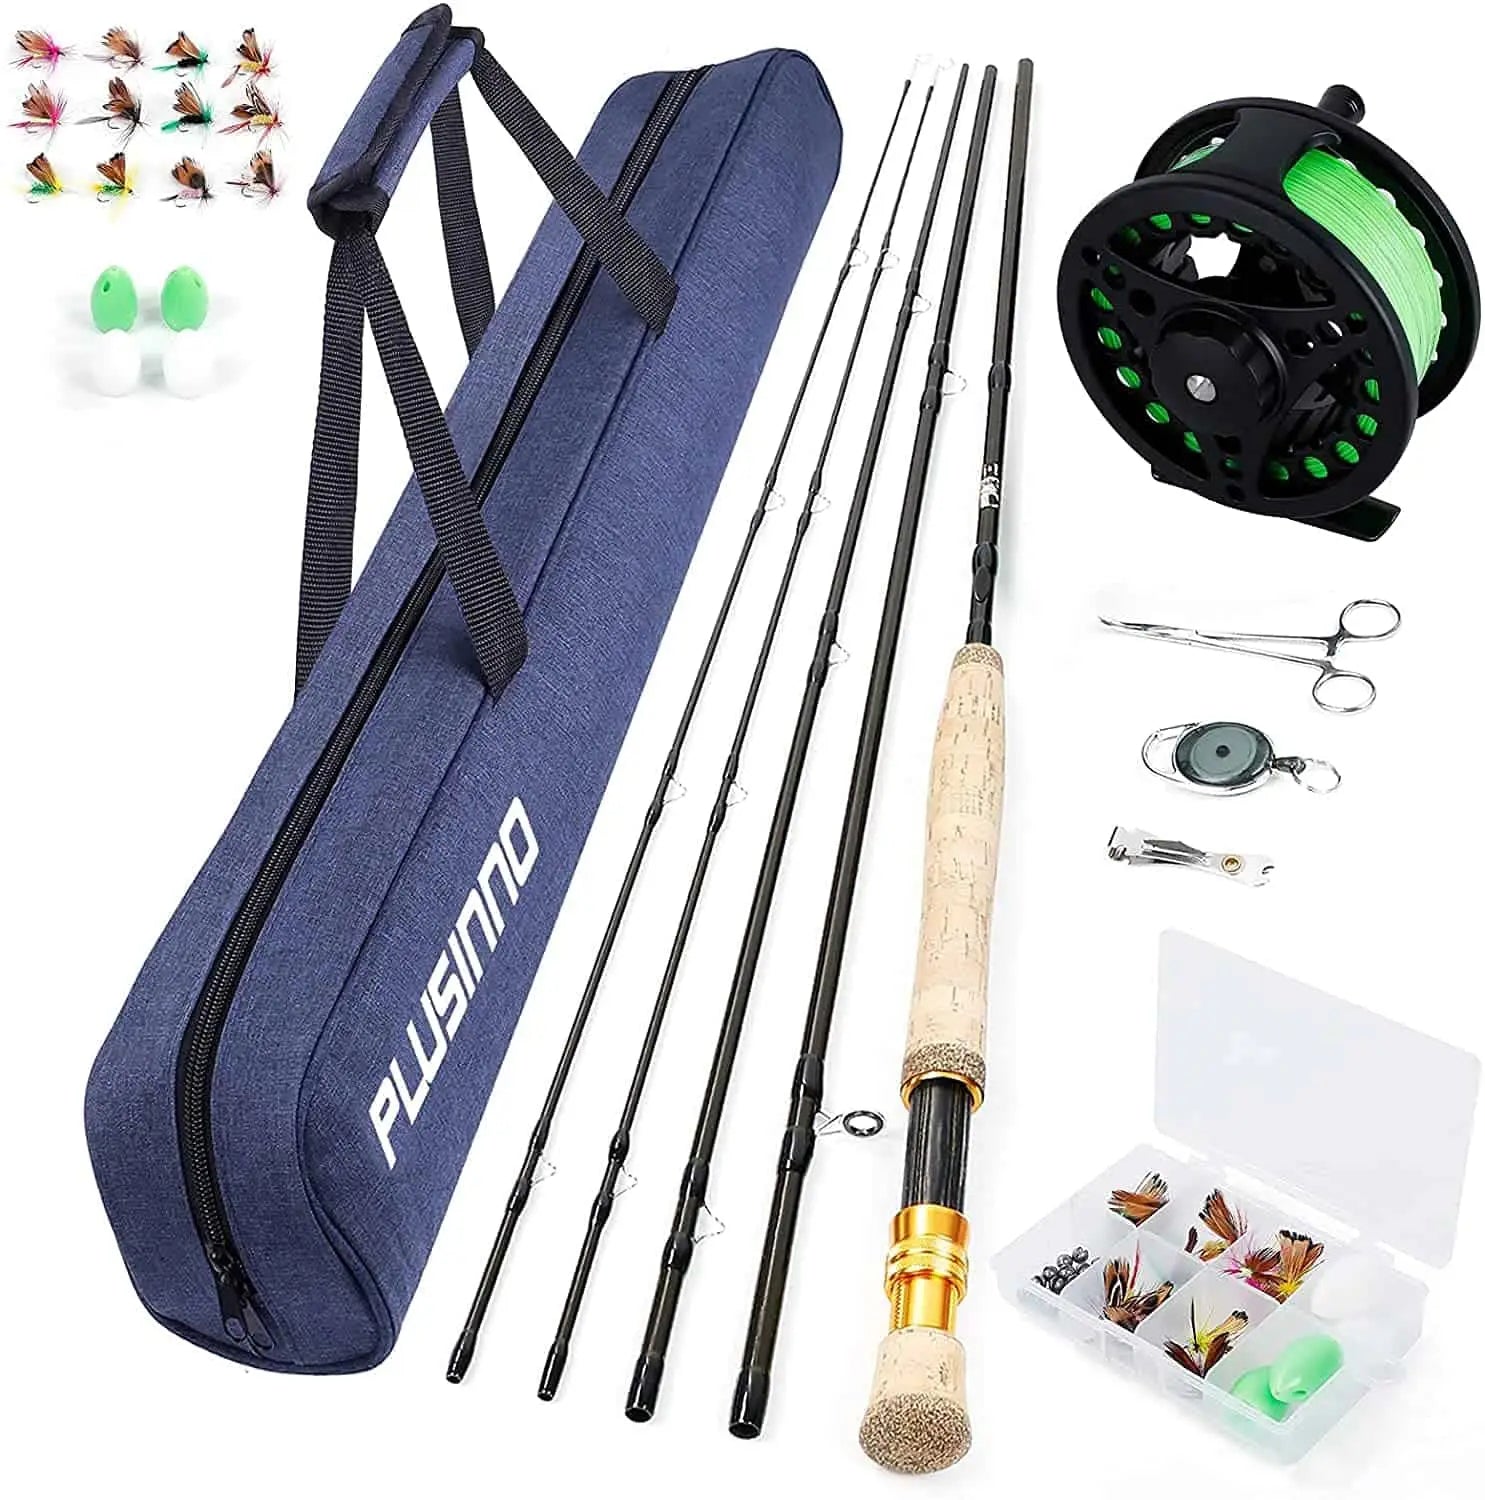 PLUSINNO Fly Fishing Rod and Reel Combo Starter Kit